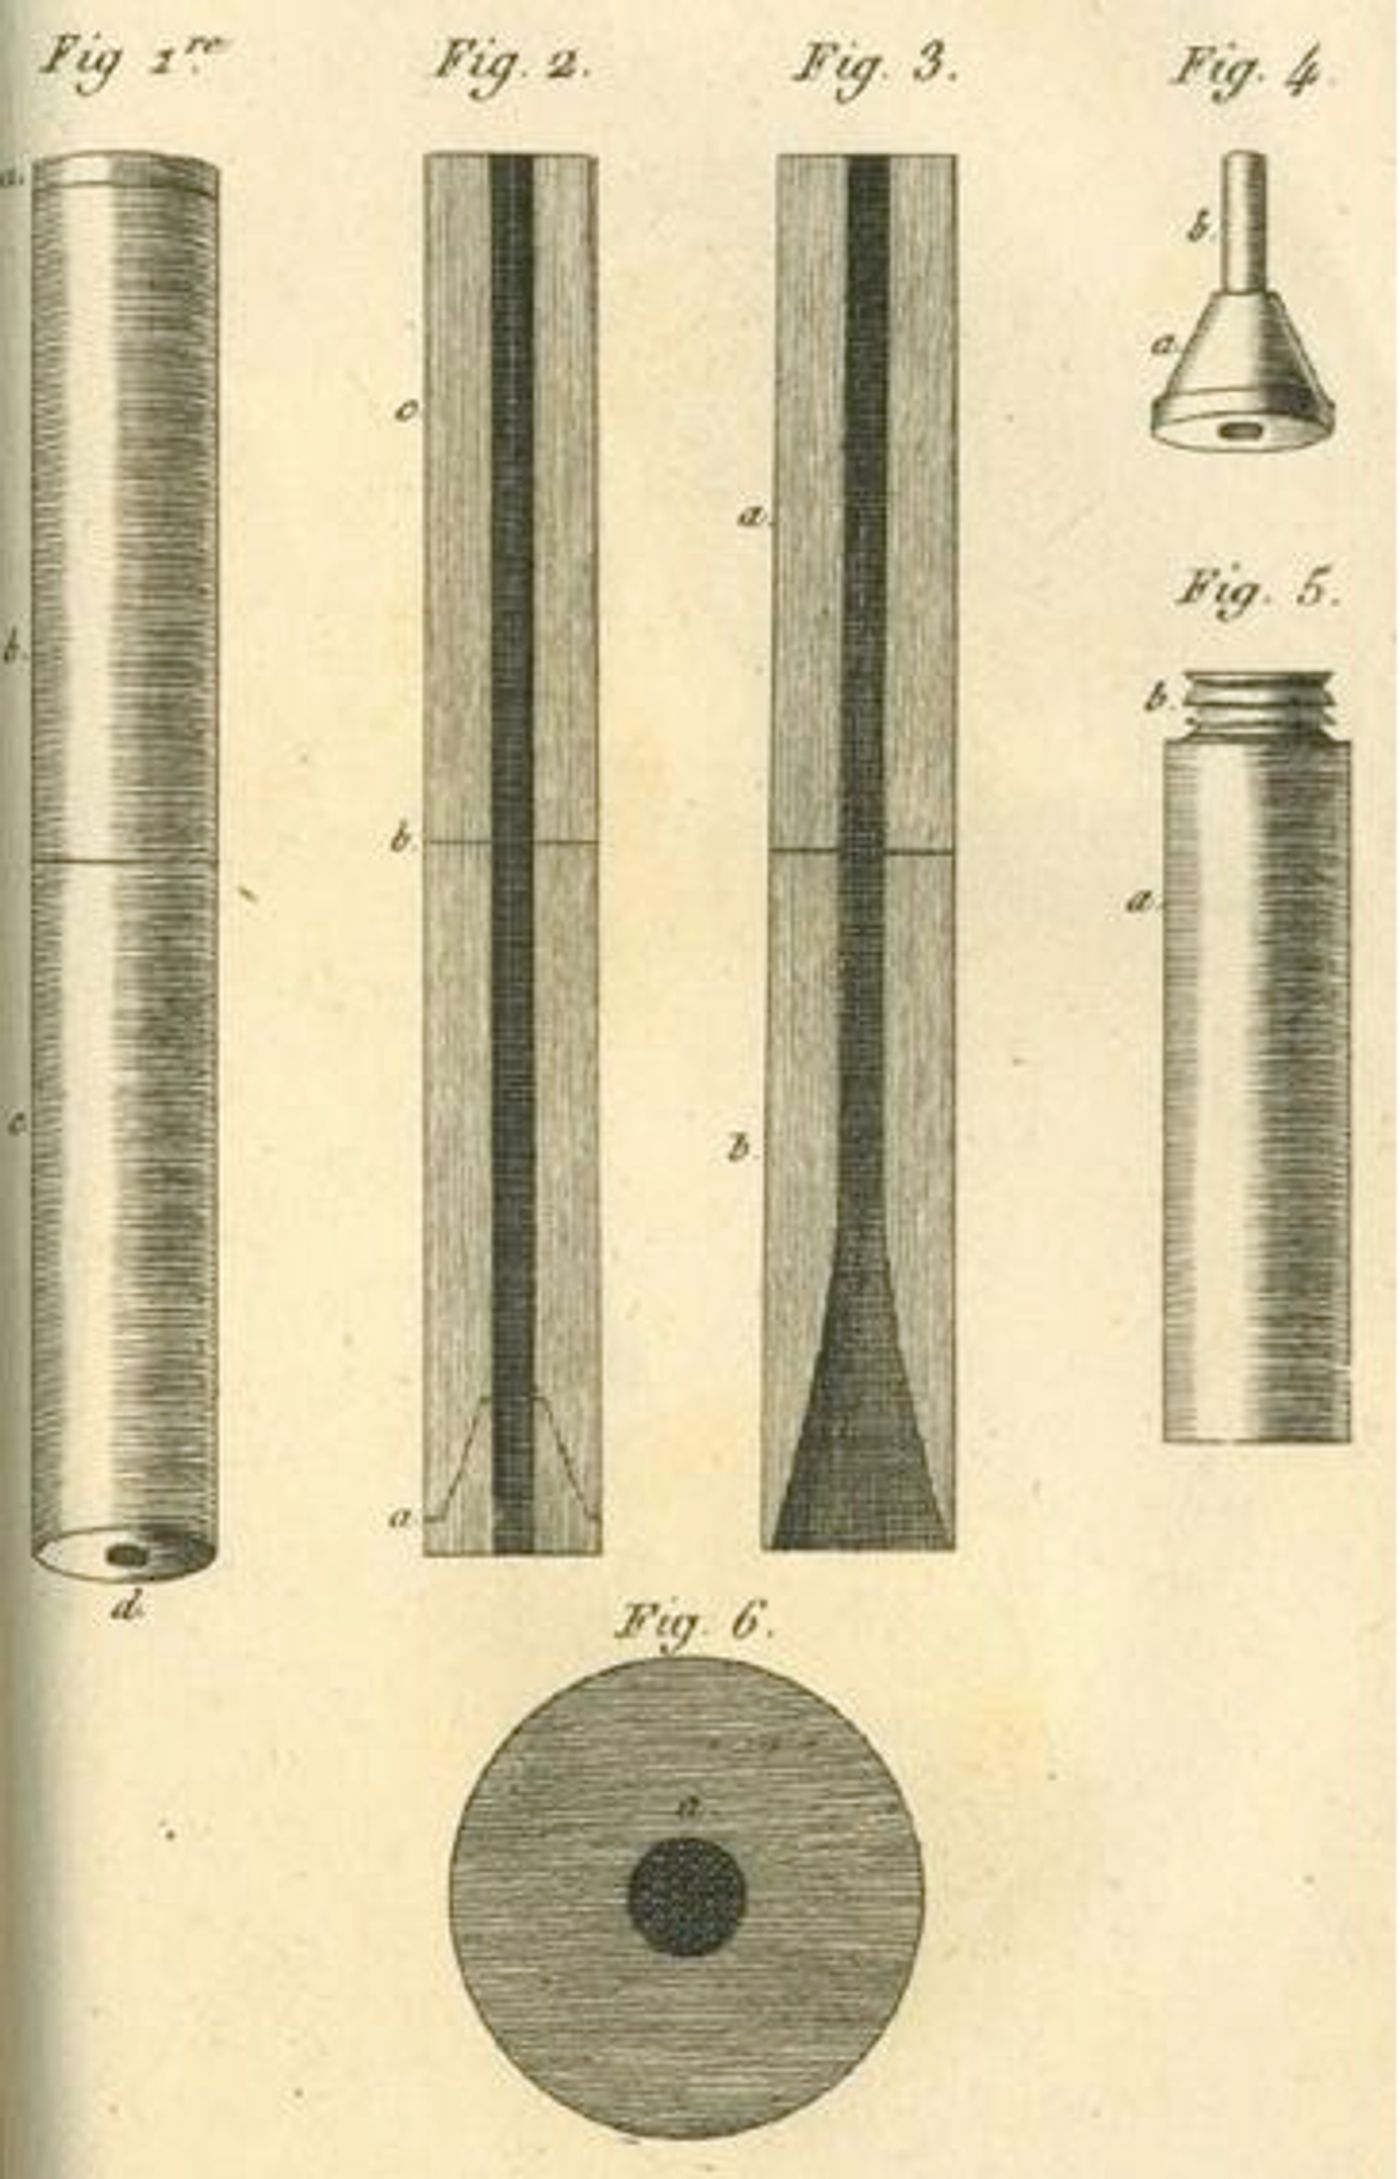 Drawing of the first stethoscope design